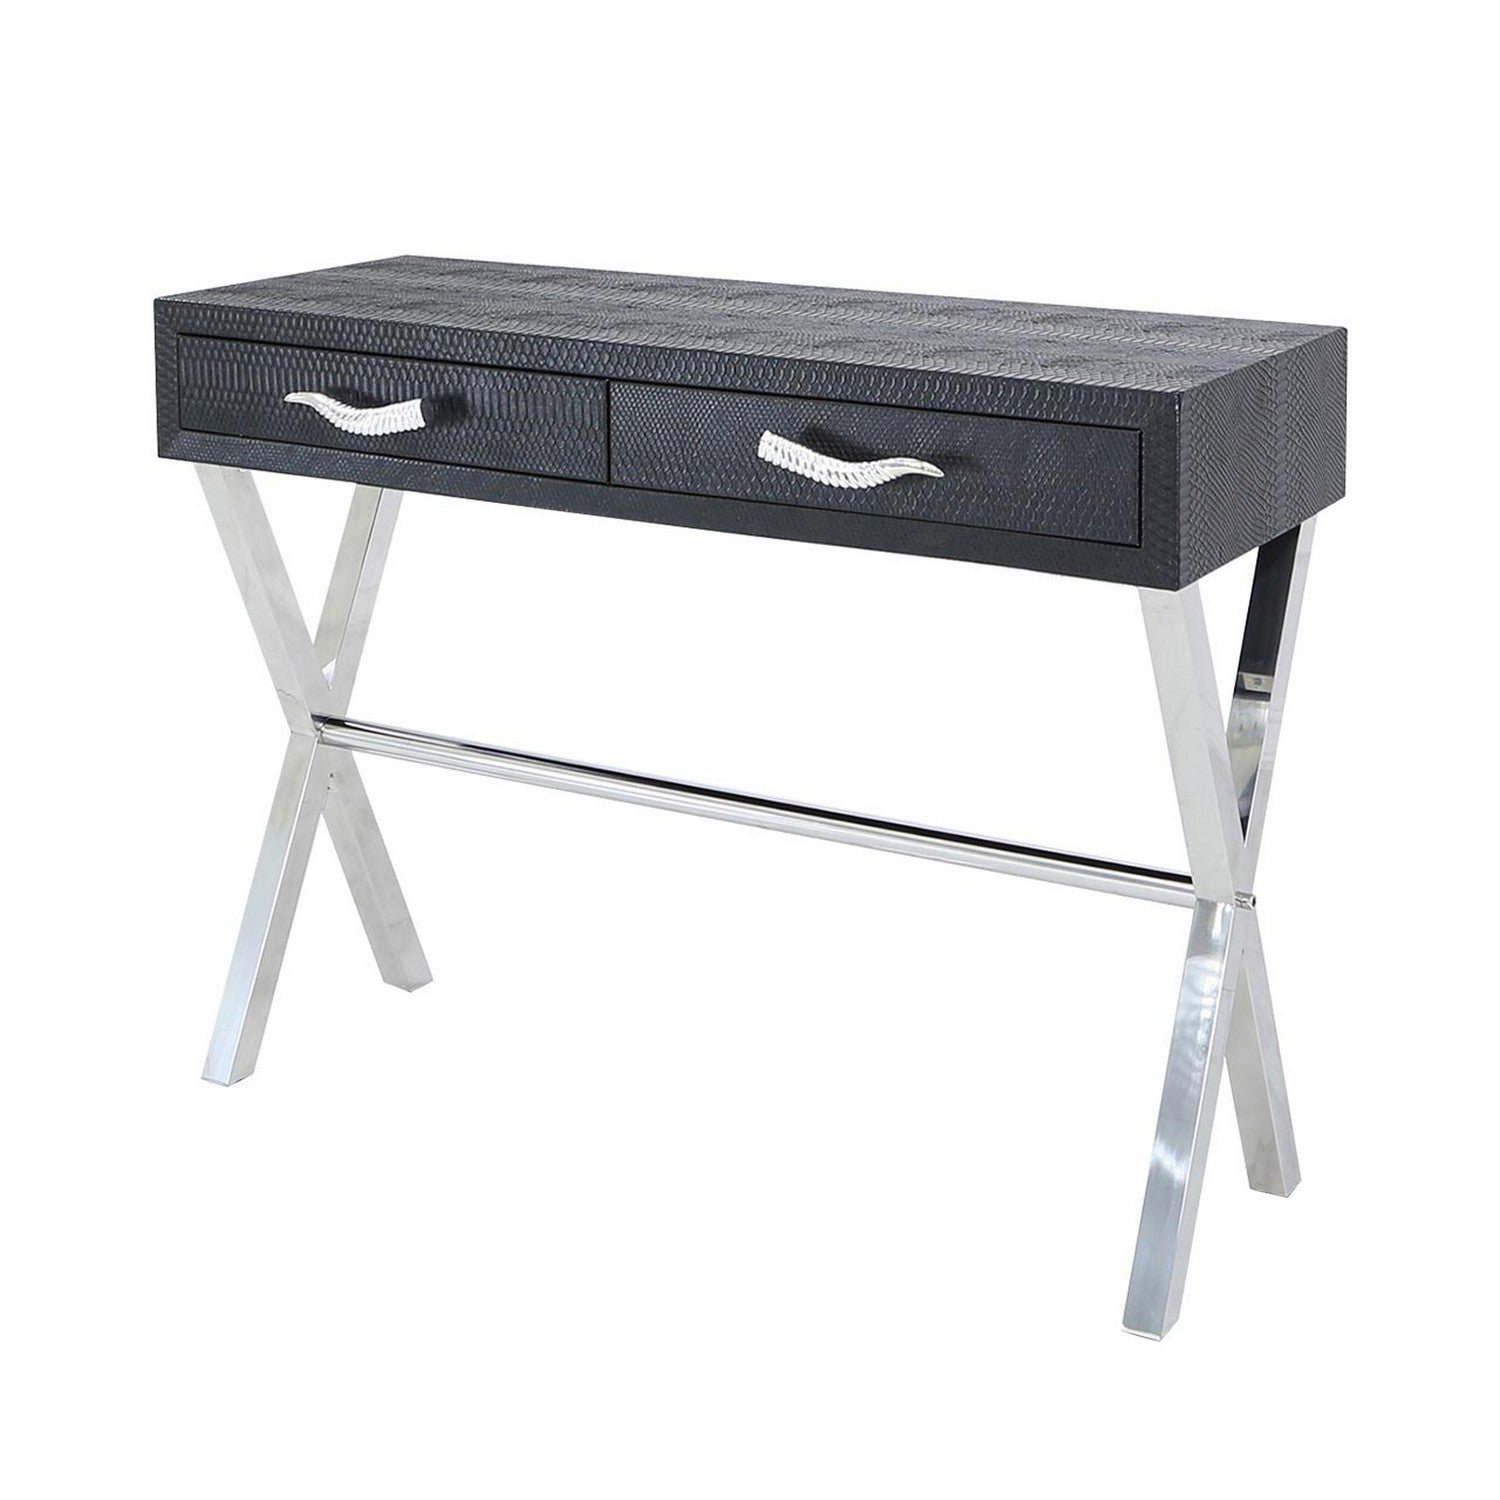 Black and Stainless Steel Faux Snakeskin 2 Drawer Console Table